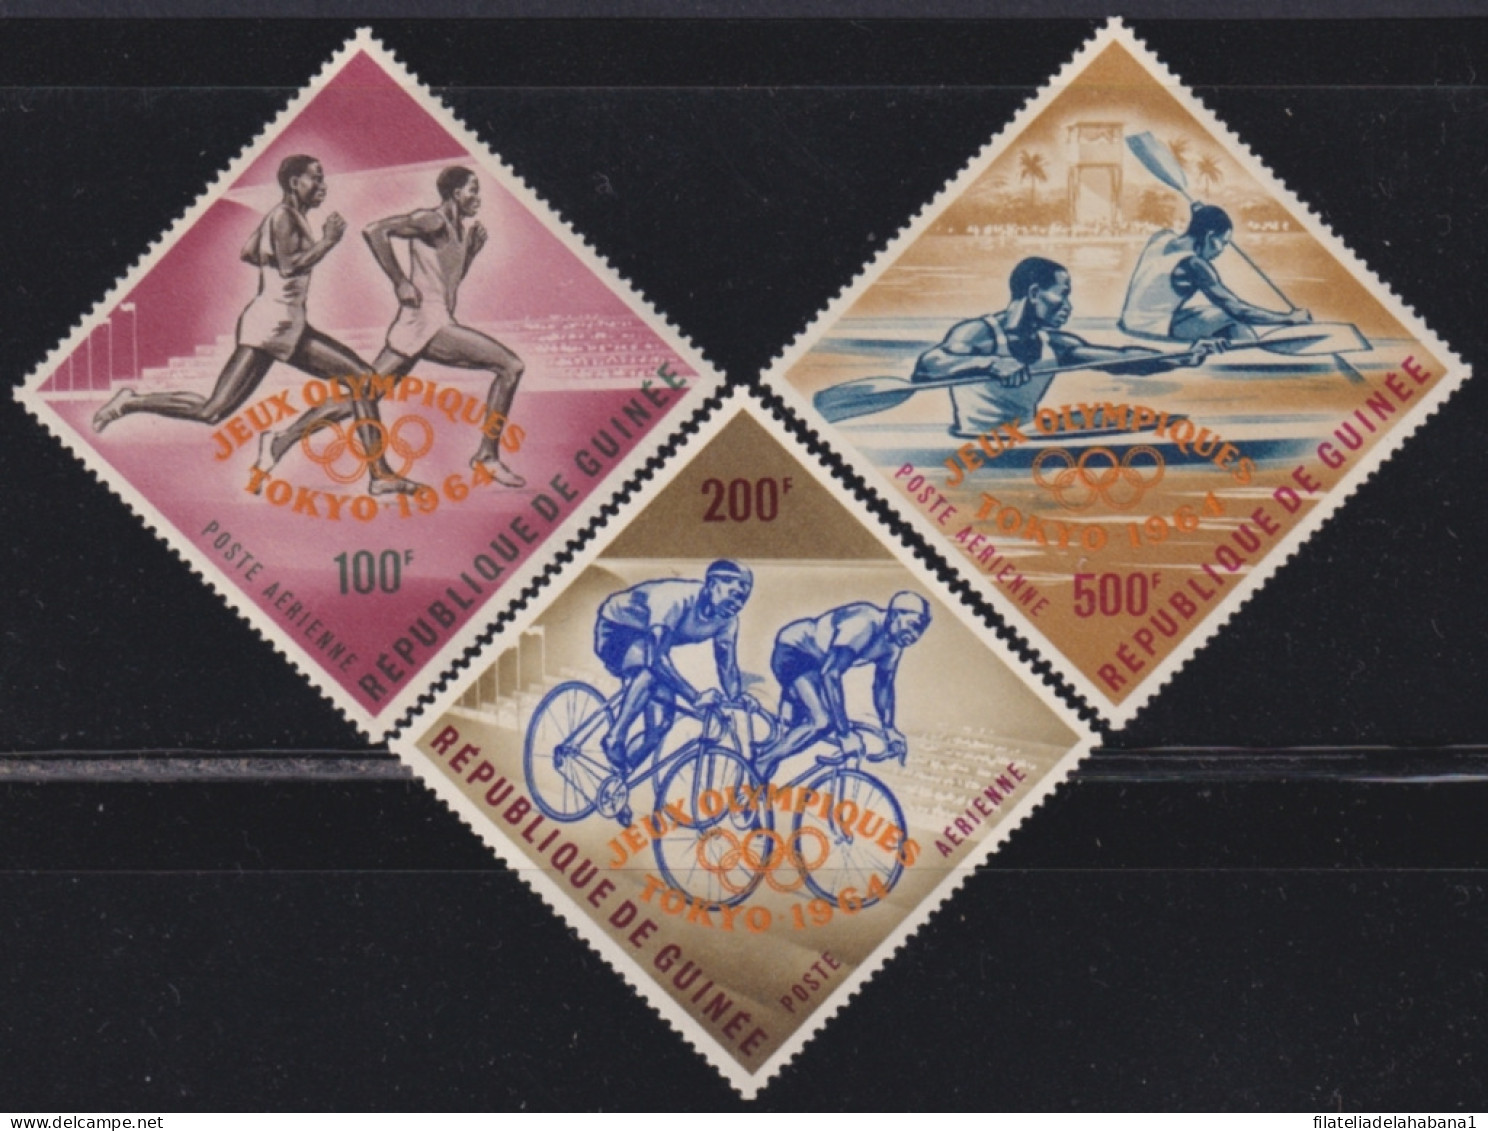 F-EX49269 GUINEE GUINEA MNH 1968 TOKIO OLYMPIC GAMES OVERPRINT CICLYNG ATHLETISM.  - Sommer 1968: Mexico